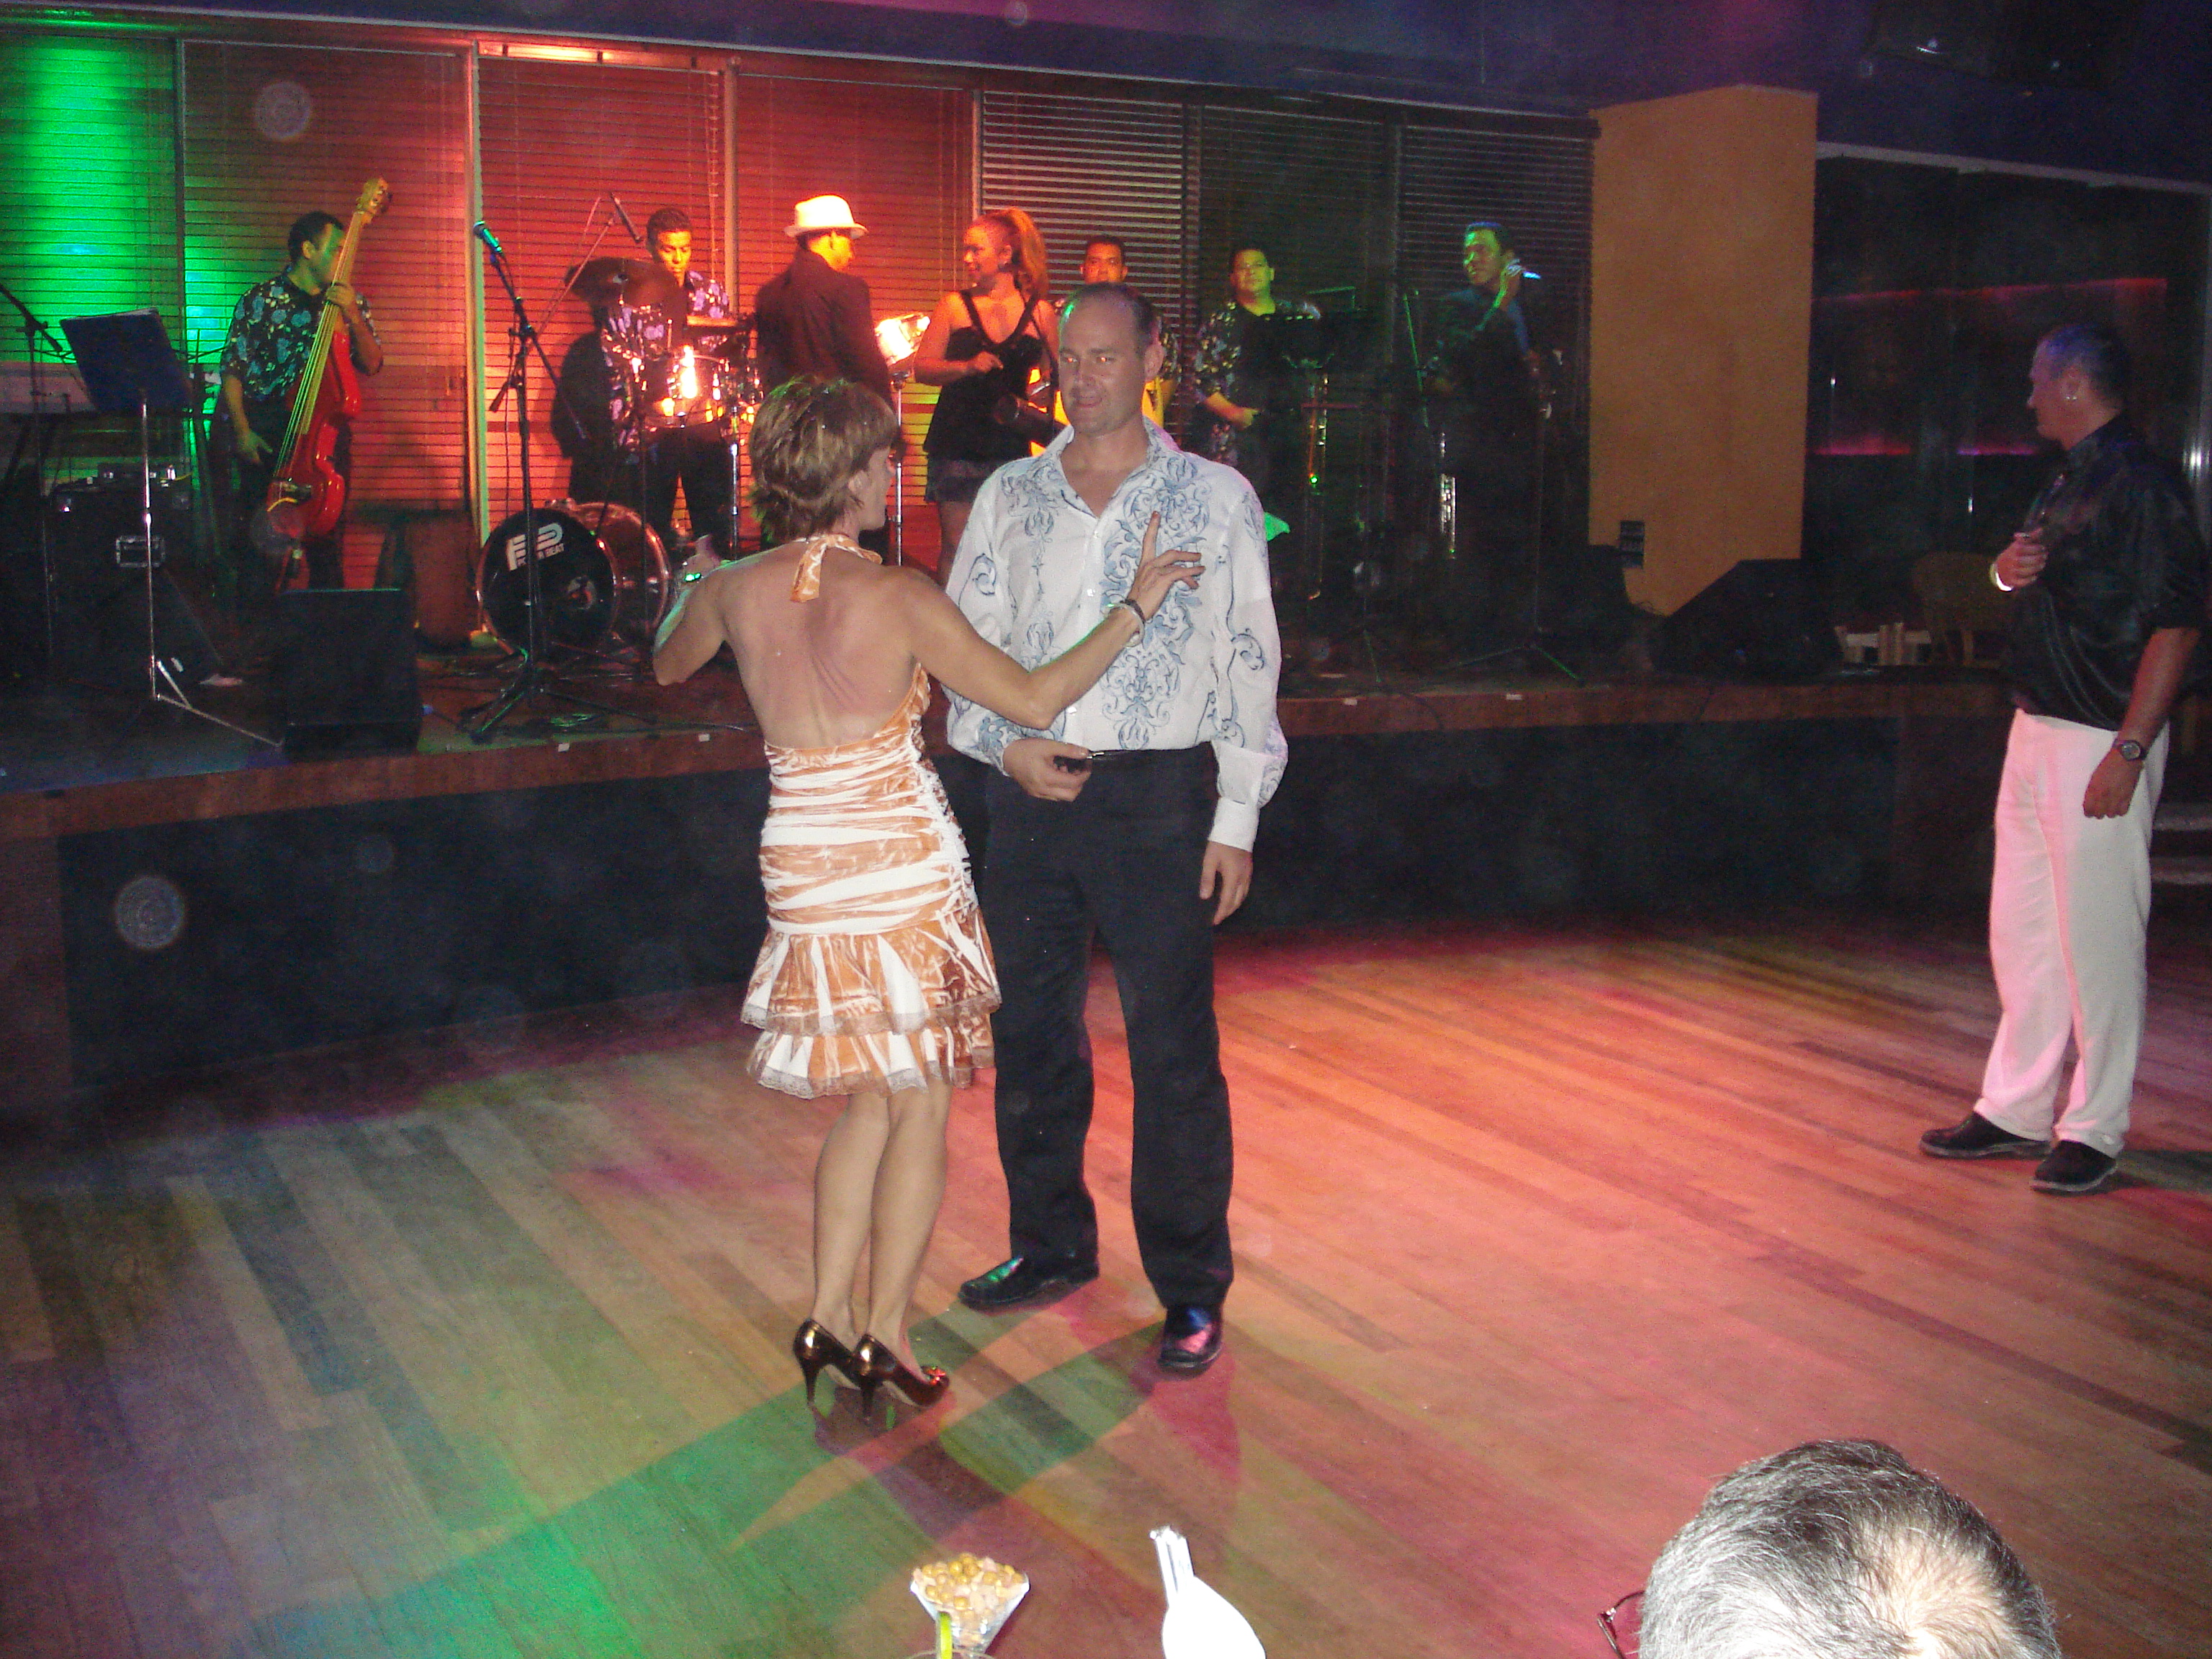 Robert and Jytte take to the dance floor